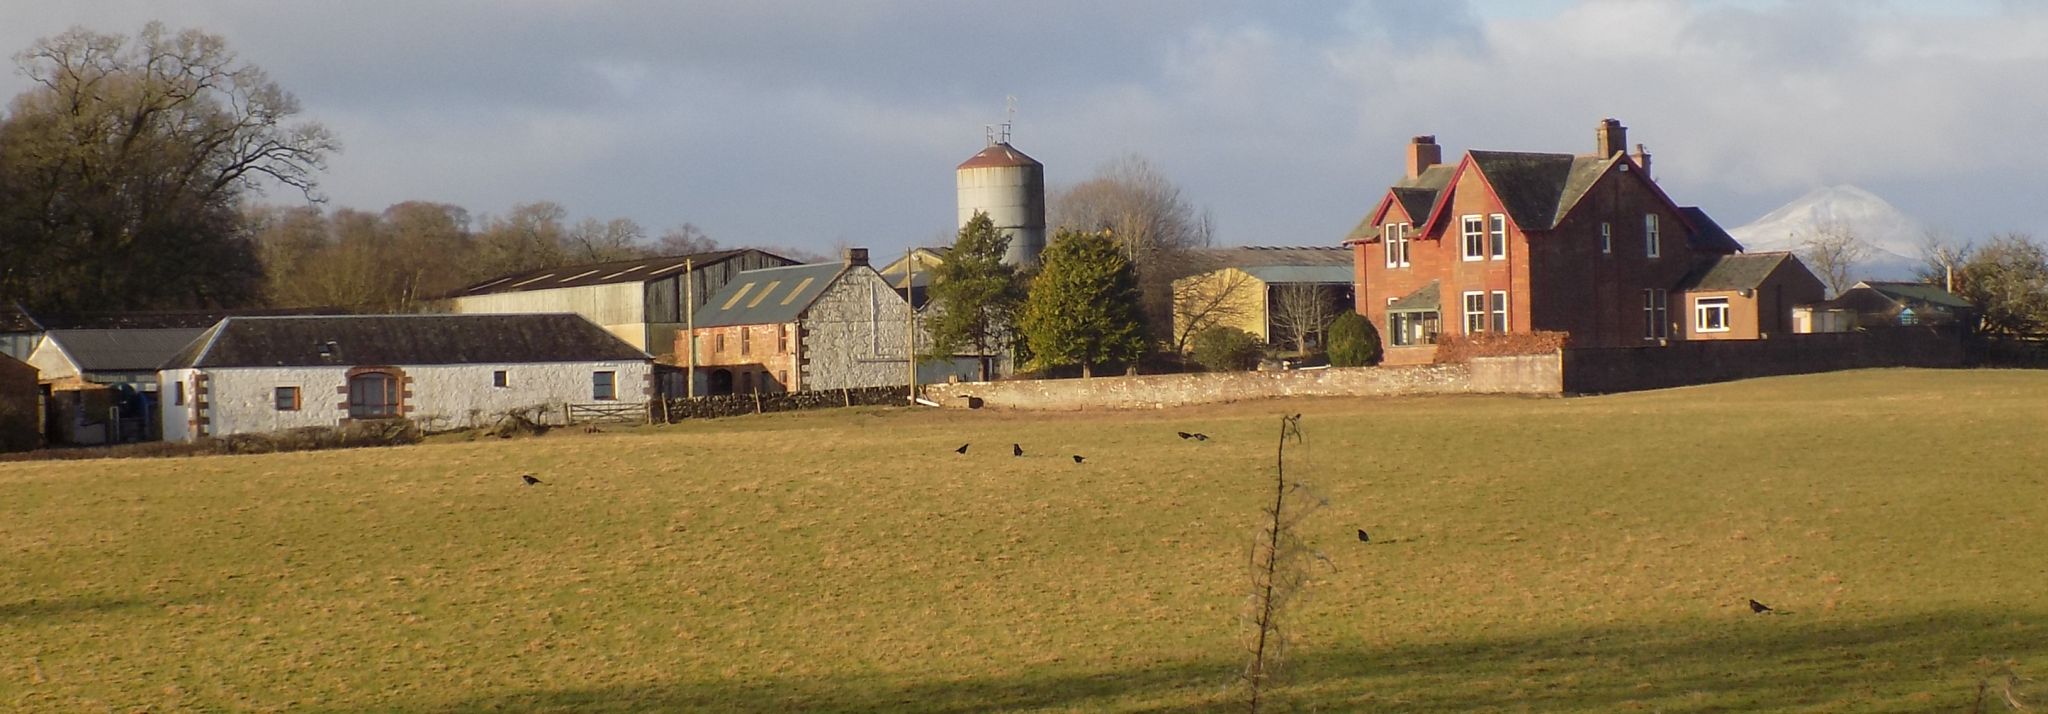 Farm from the track of the old railway line